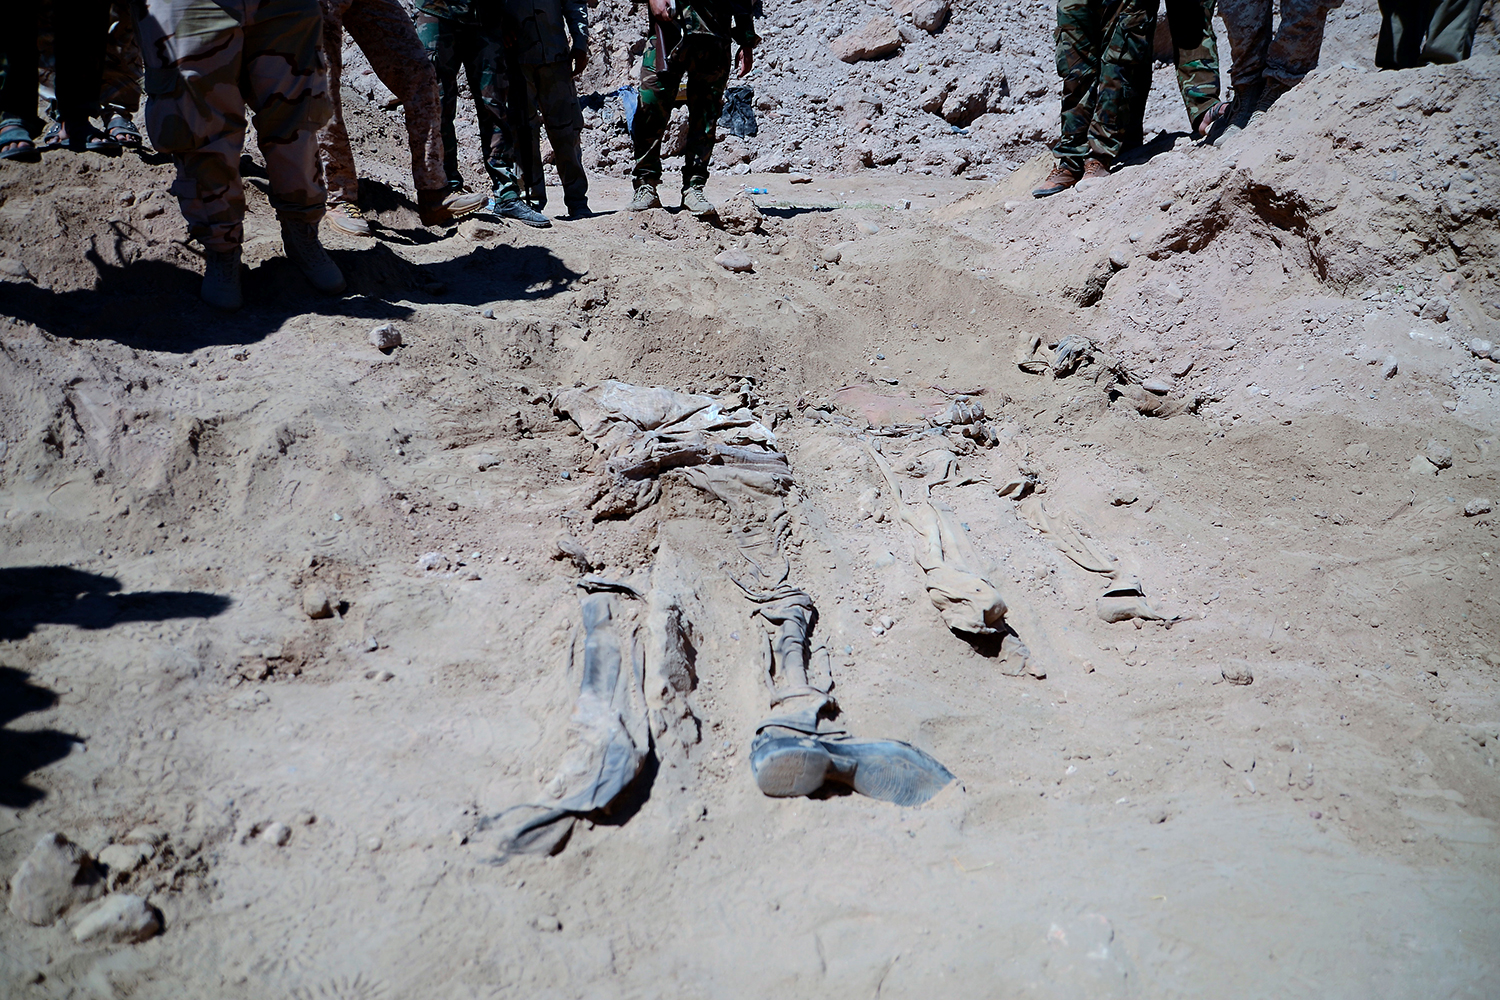 Two mass graves reveal the atrocities of the Islamic State